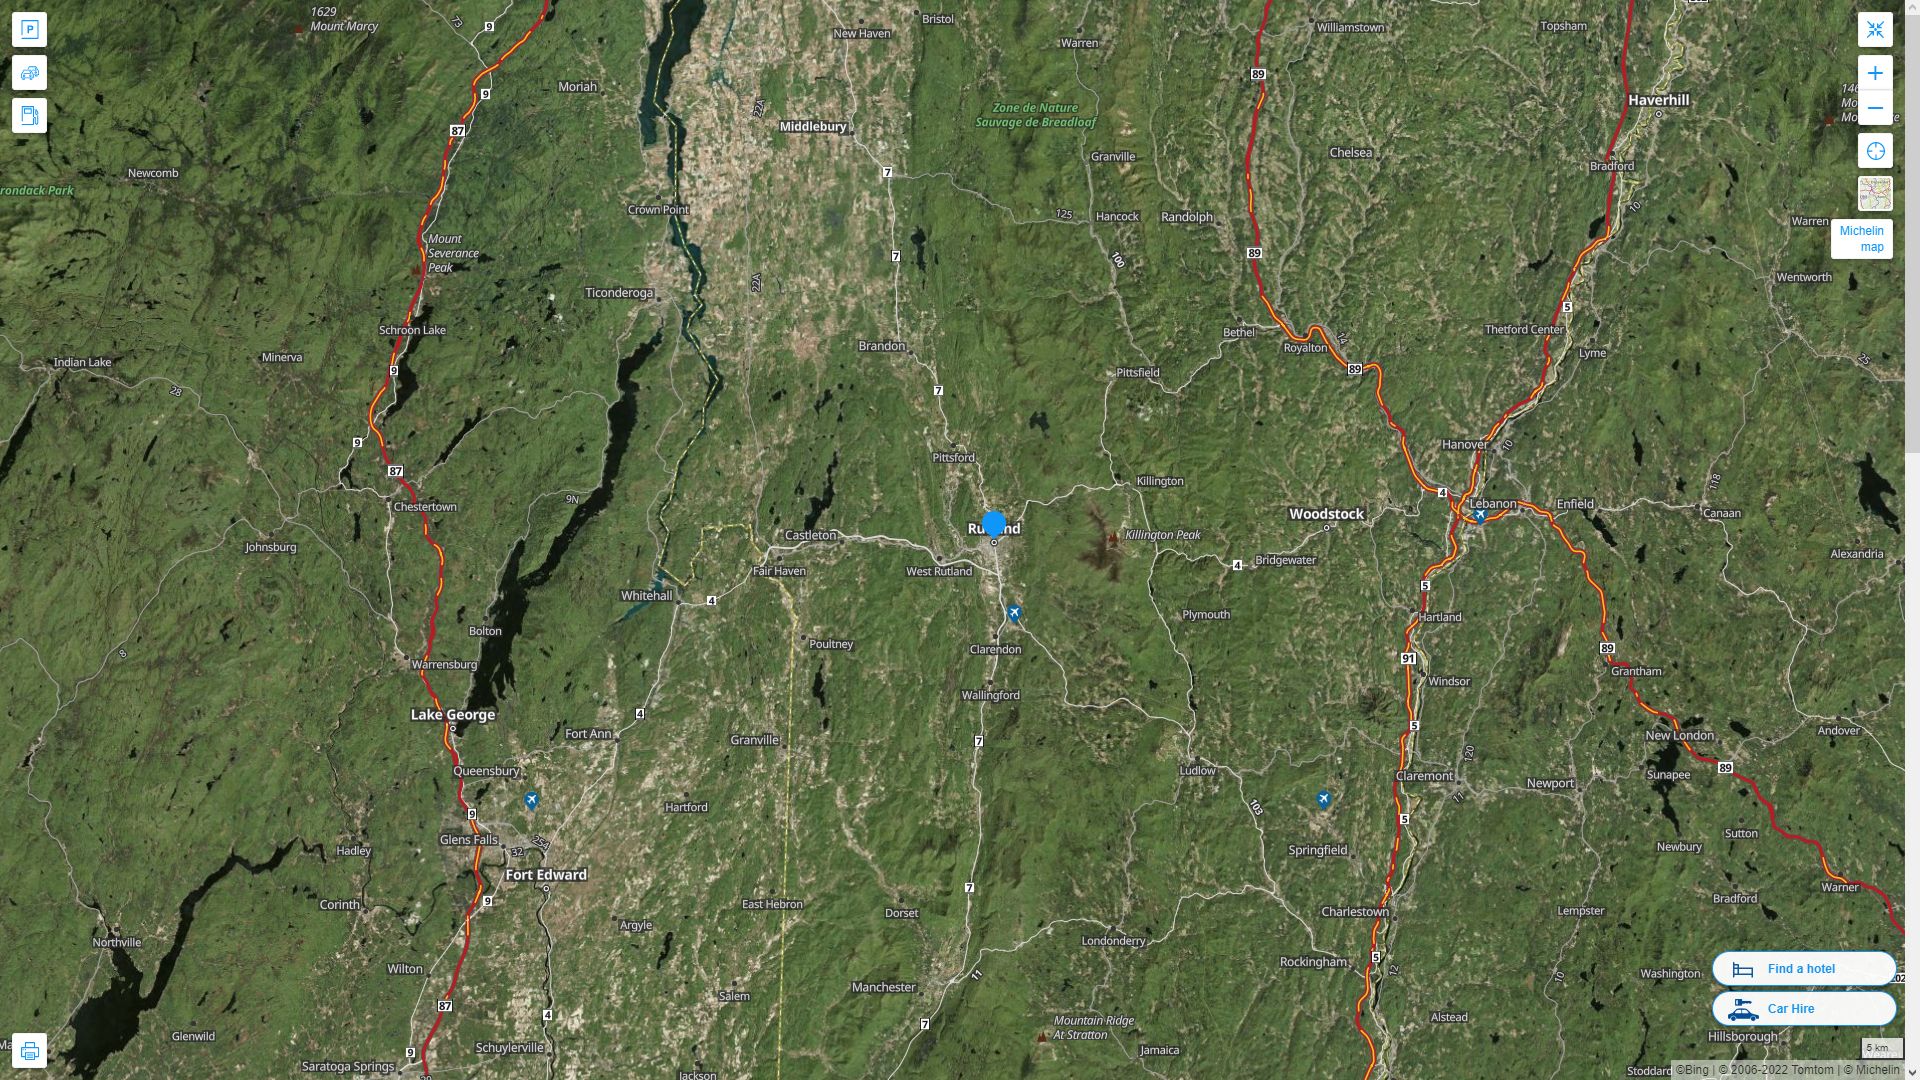 Rutland Vermont Highway and Road Map with Satellite View